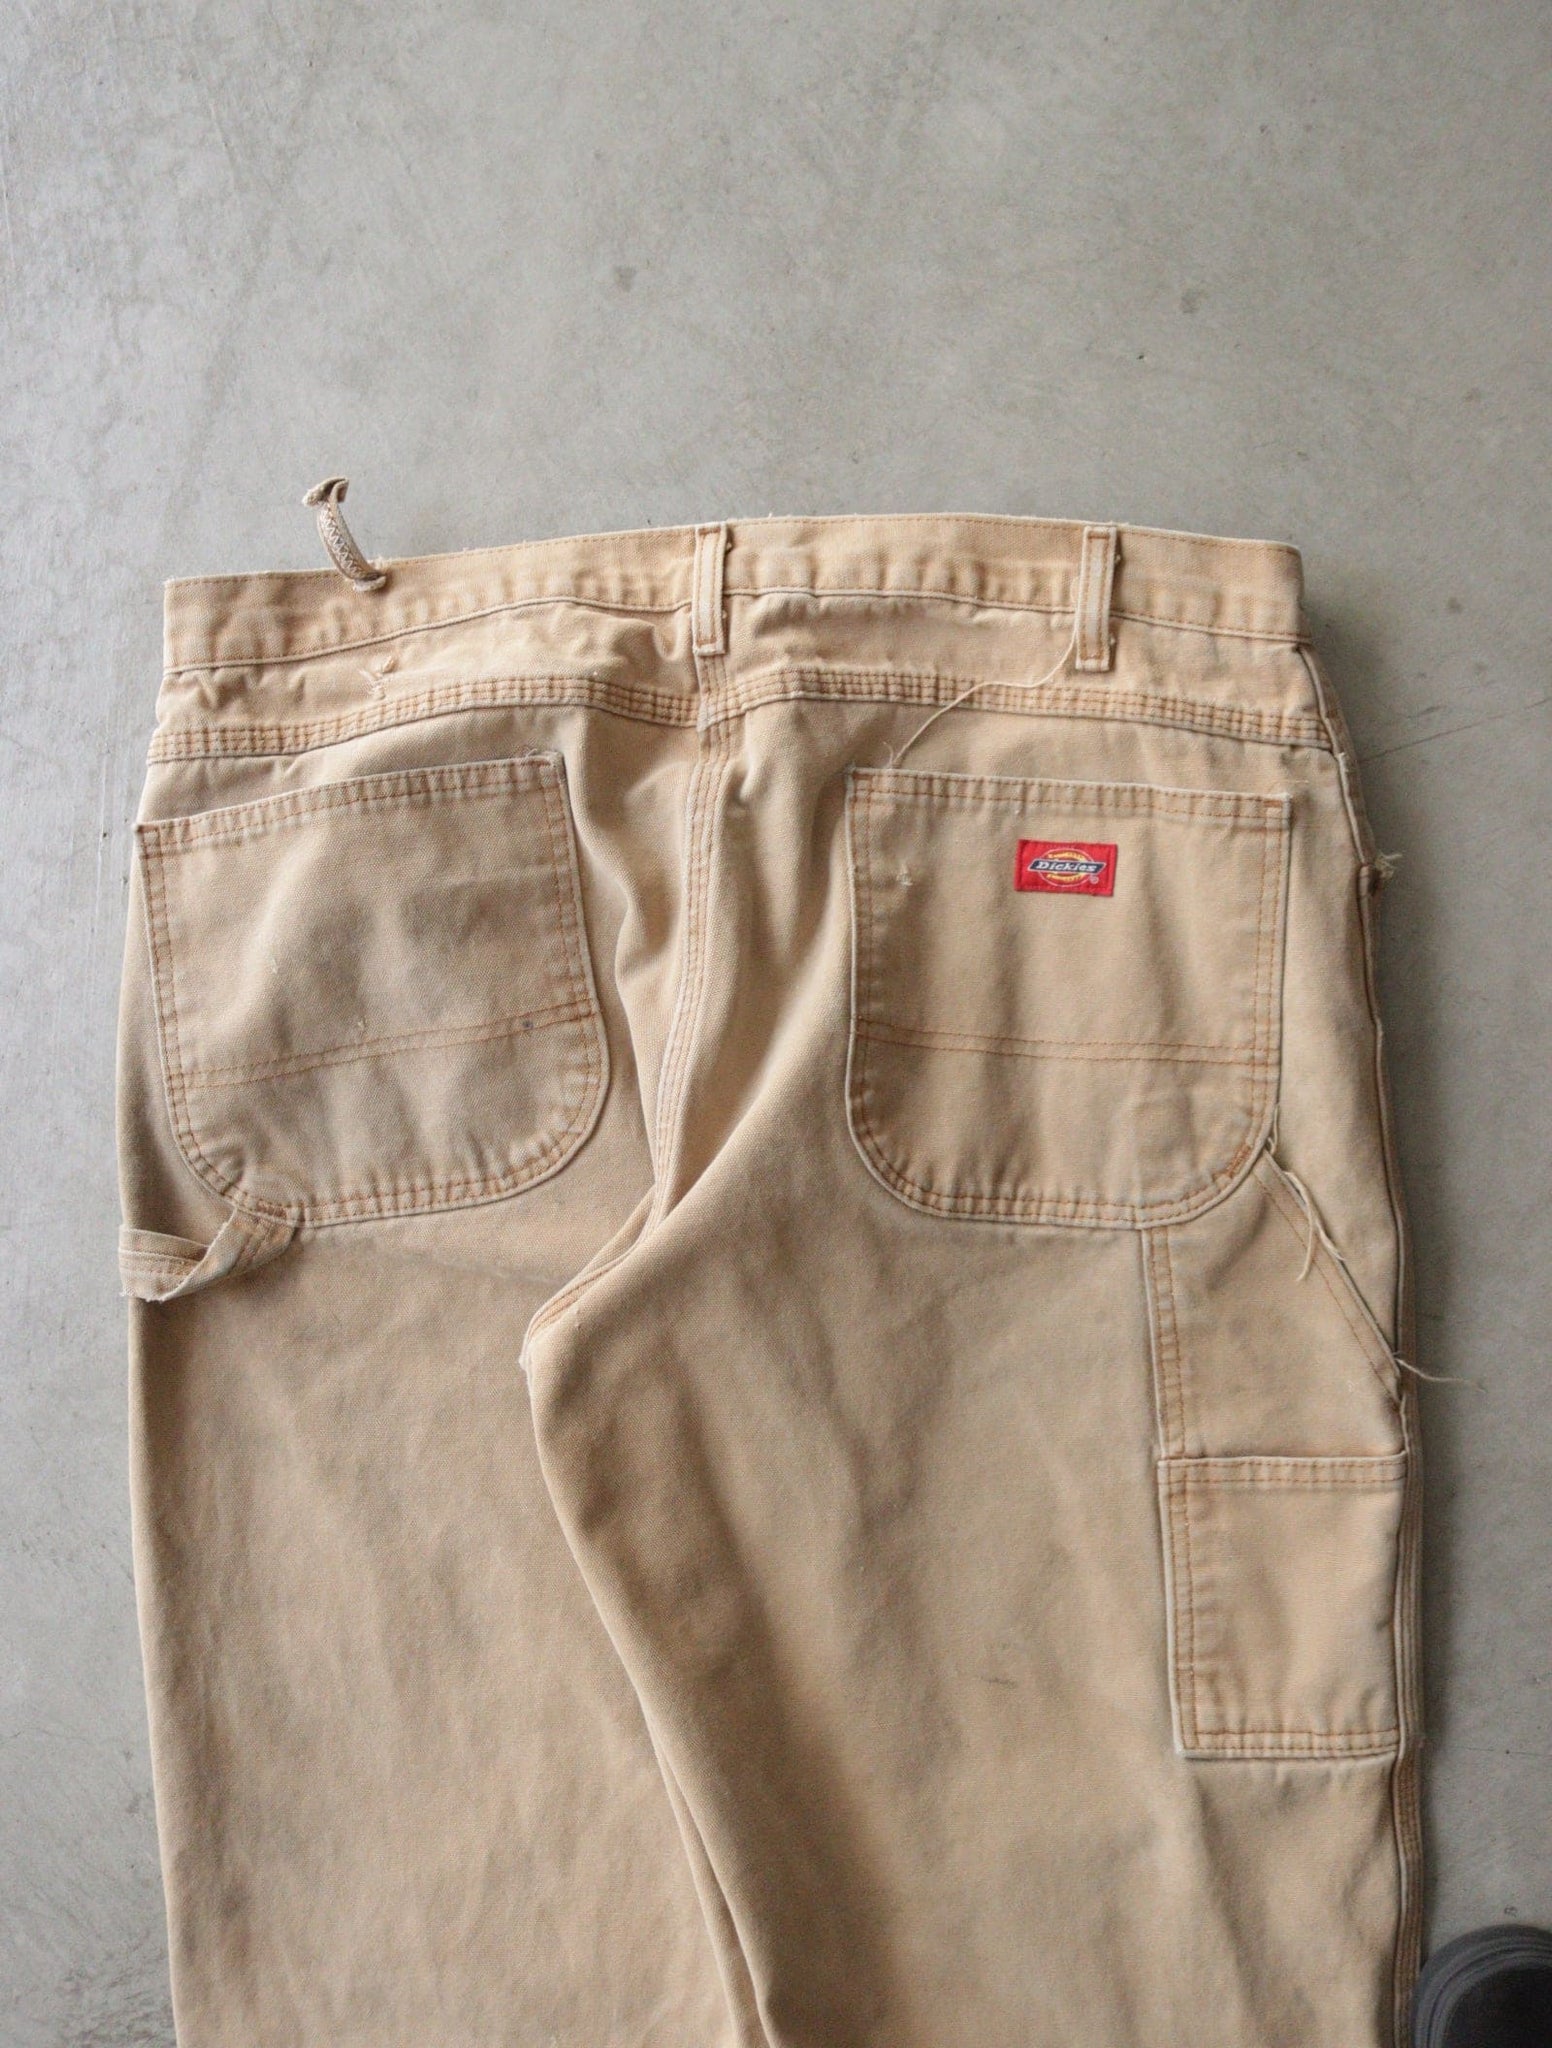 DICKIES OIL STAINED WORK PANTS